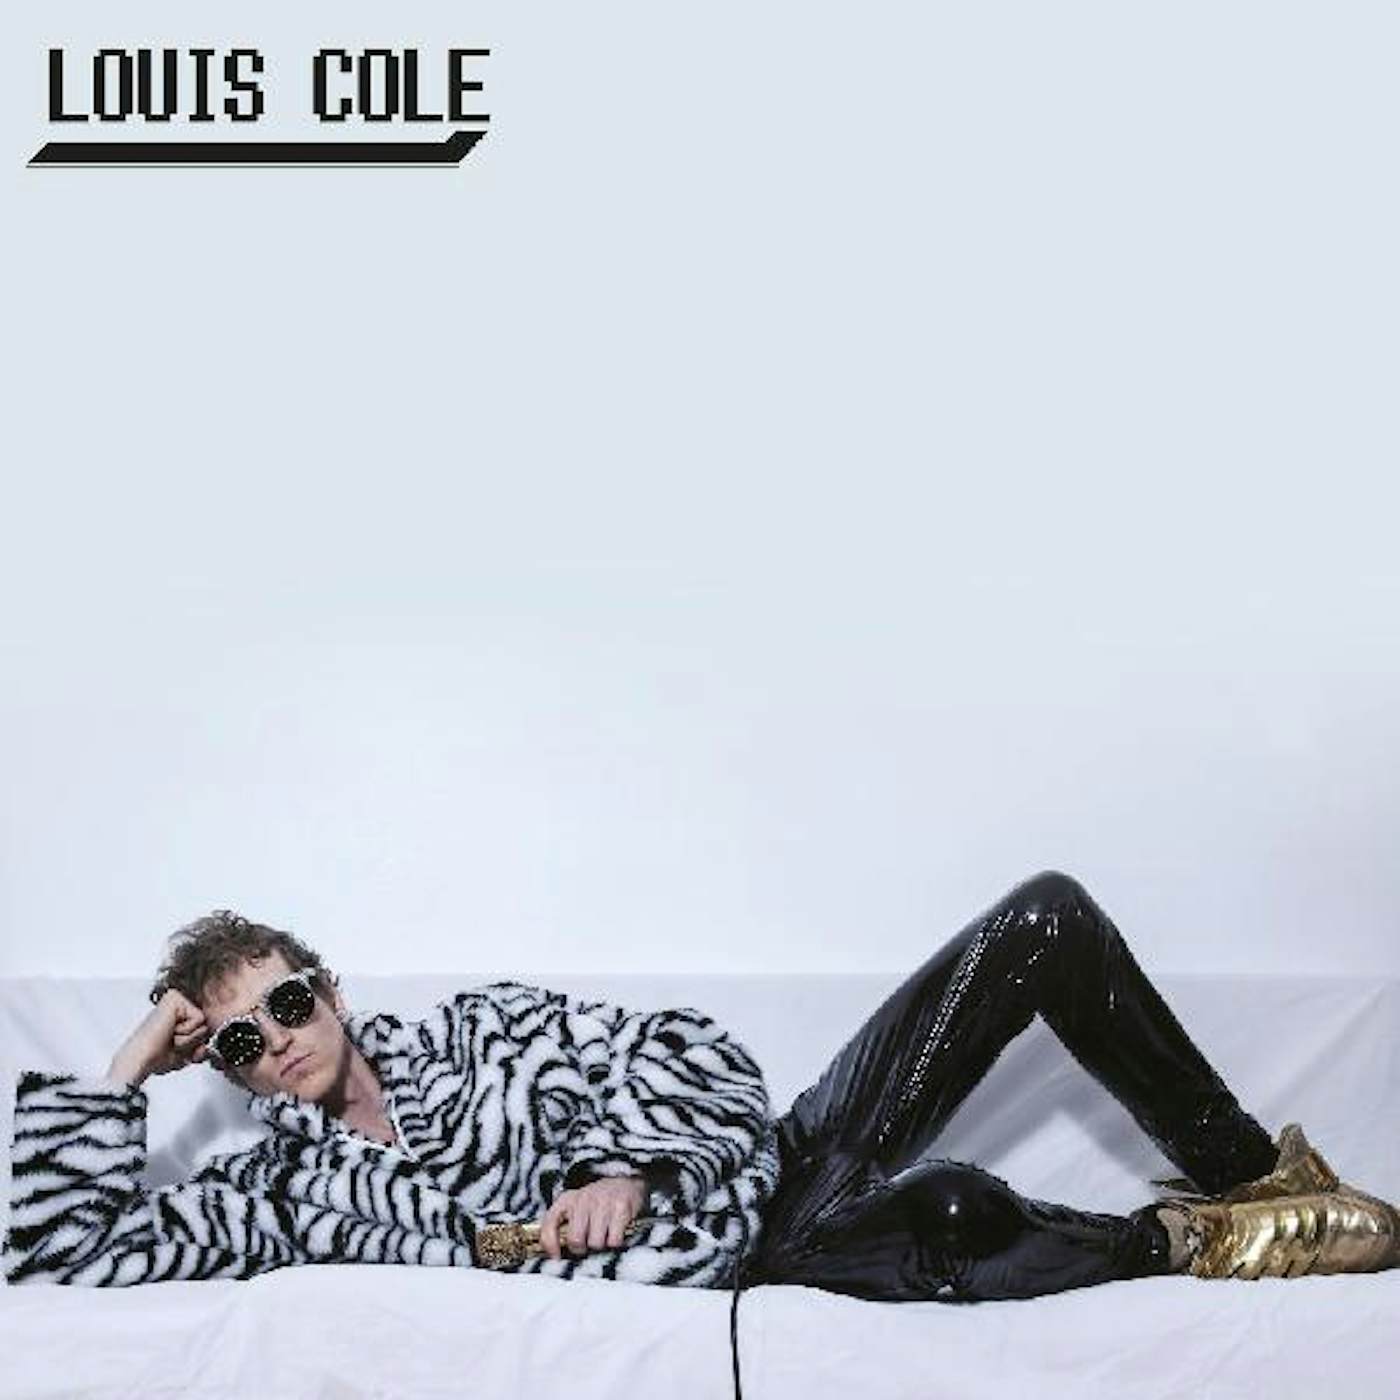 Louis Cole / Time / CD